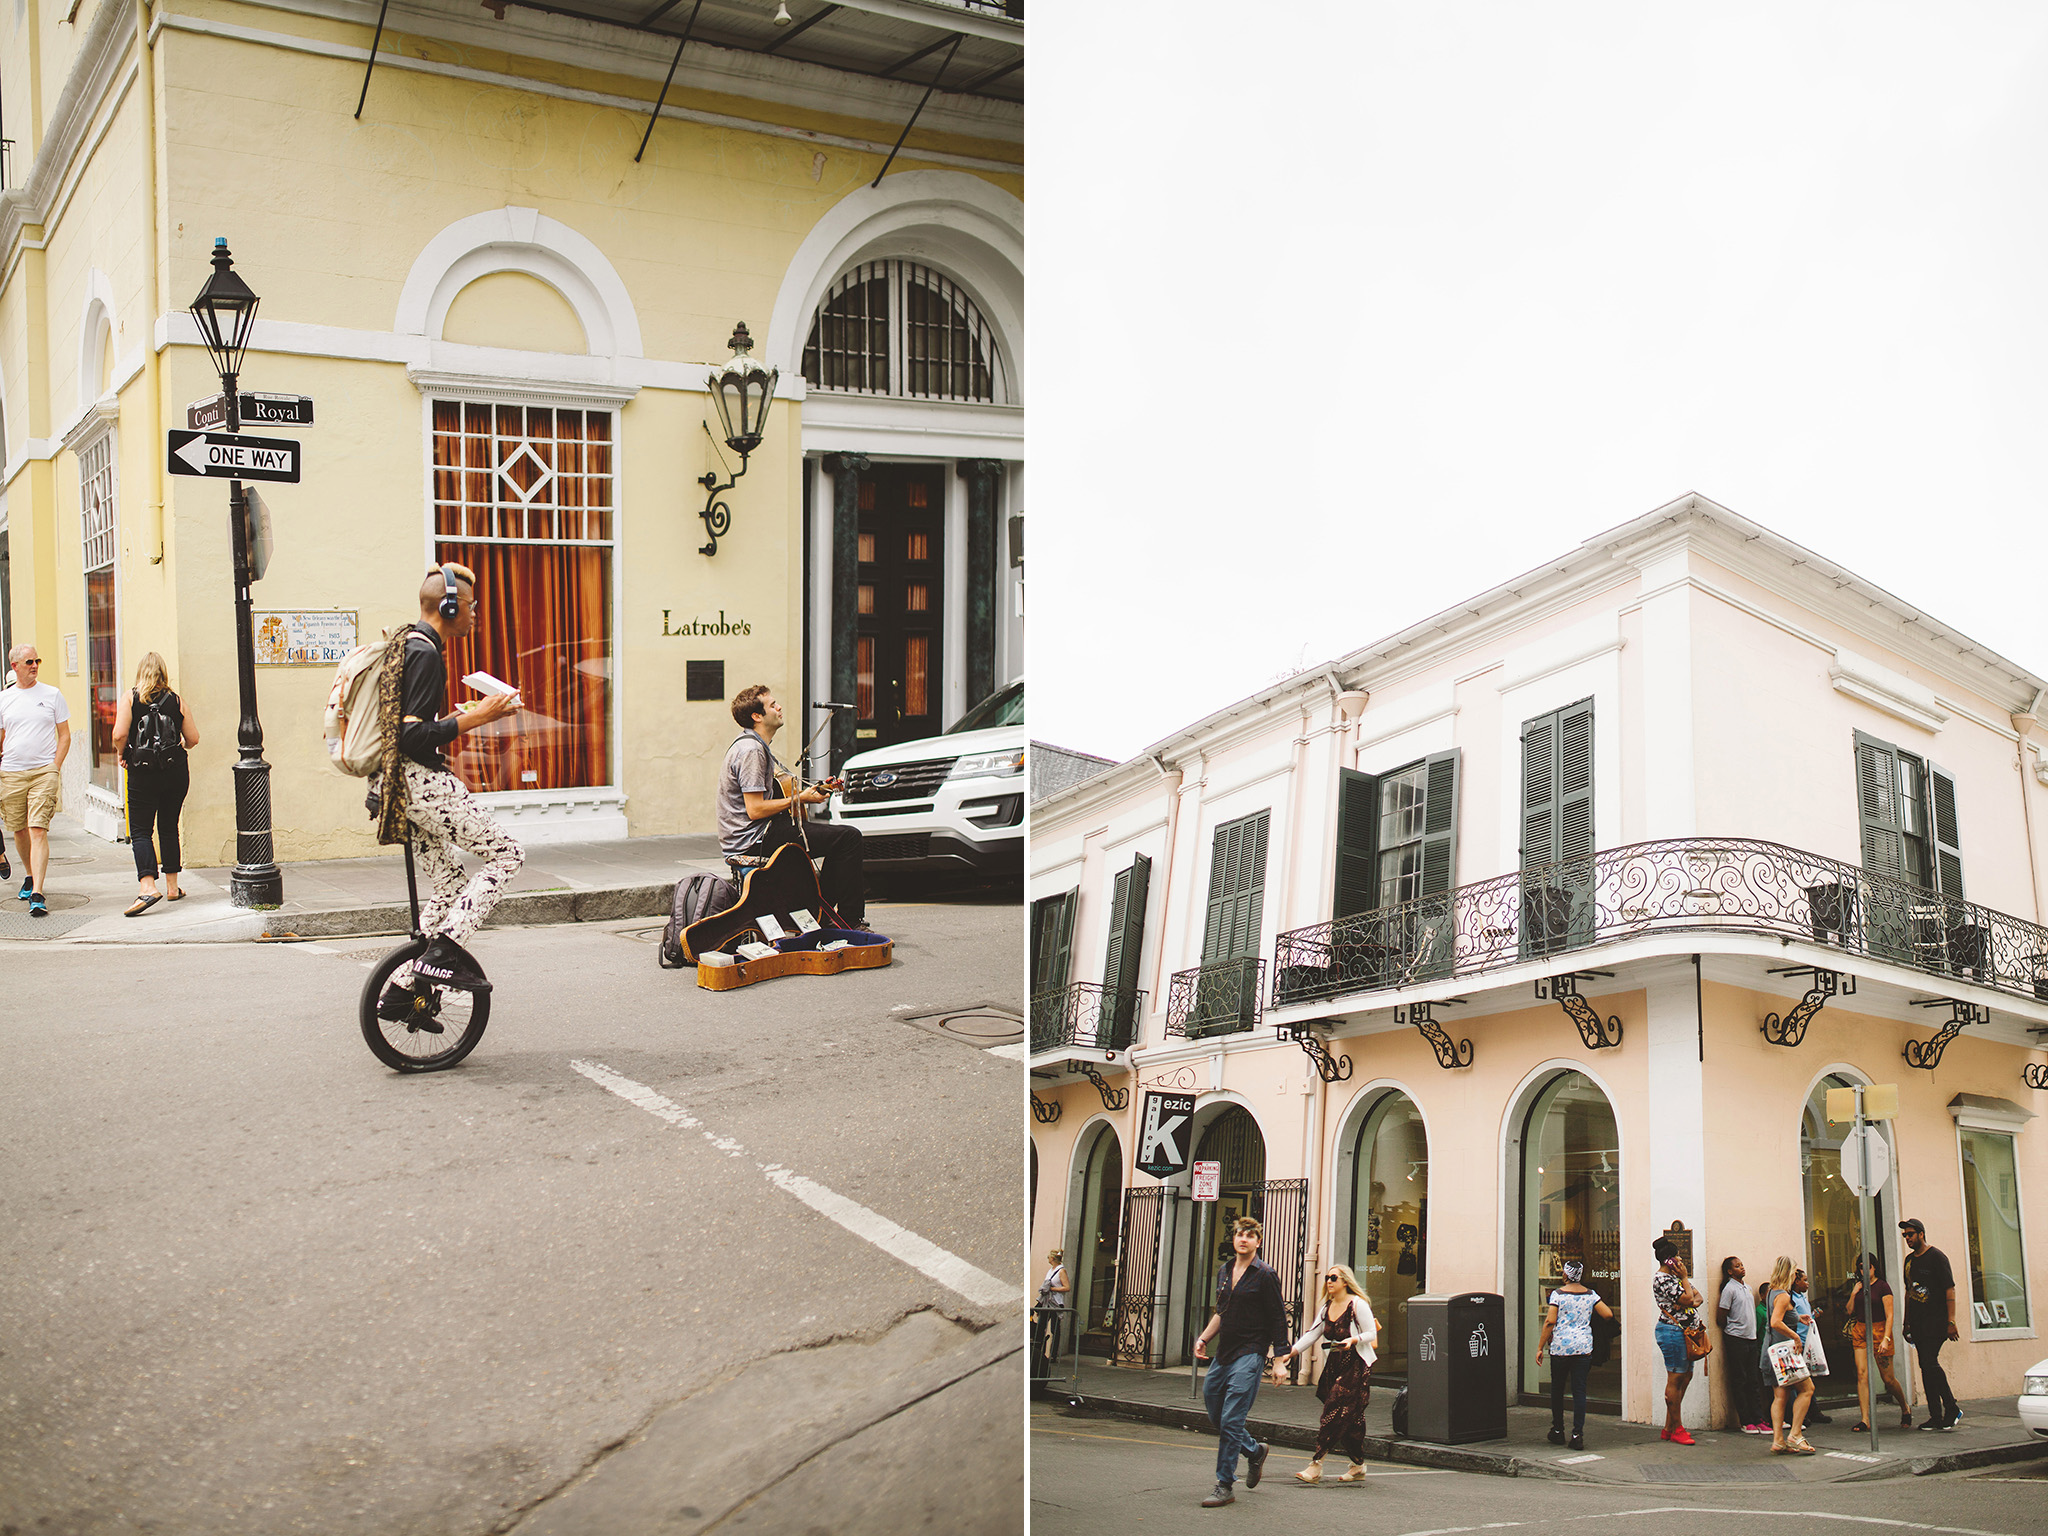 New Orleans wedding elopement pictures in the French quarter 